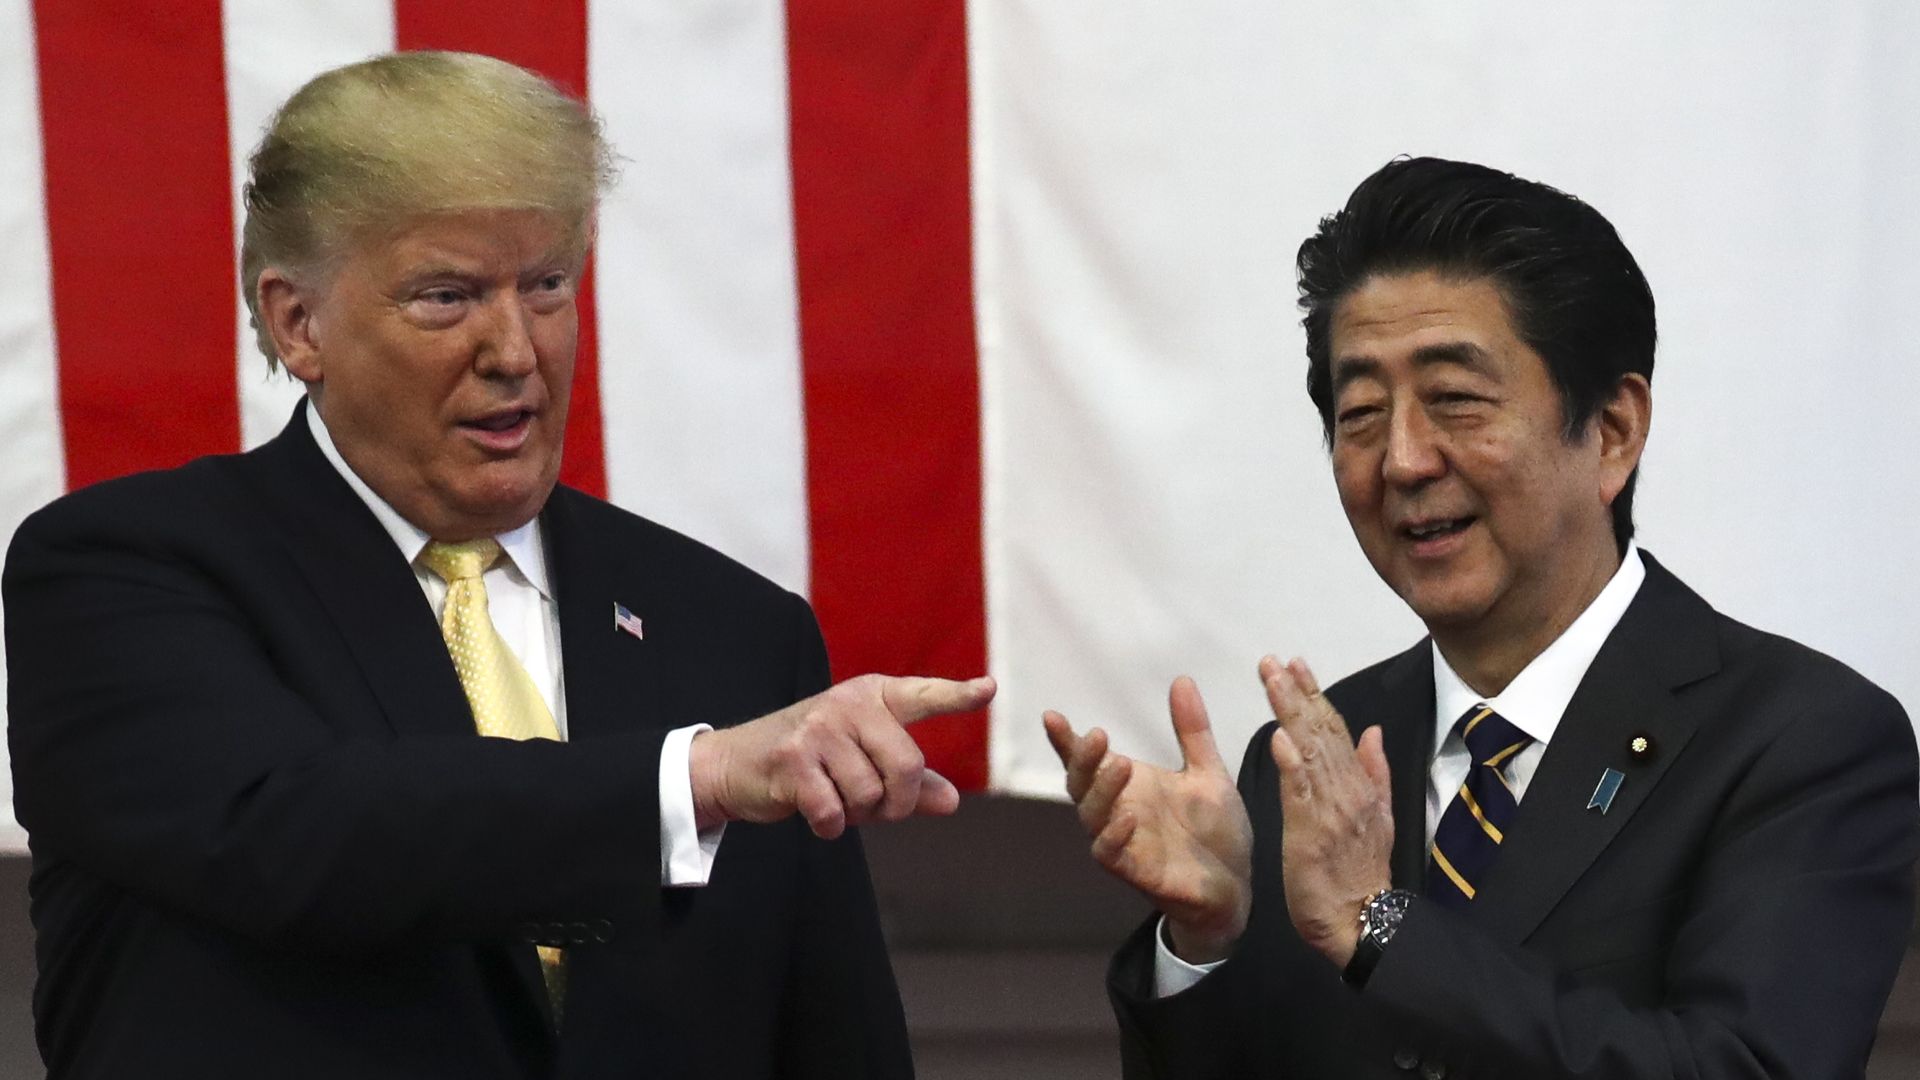 Donald Trump and Shinzo Abe standing side by side